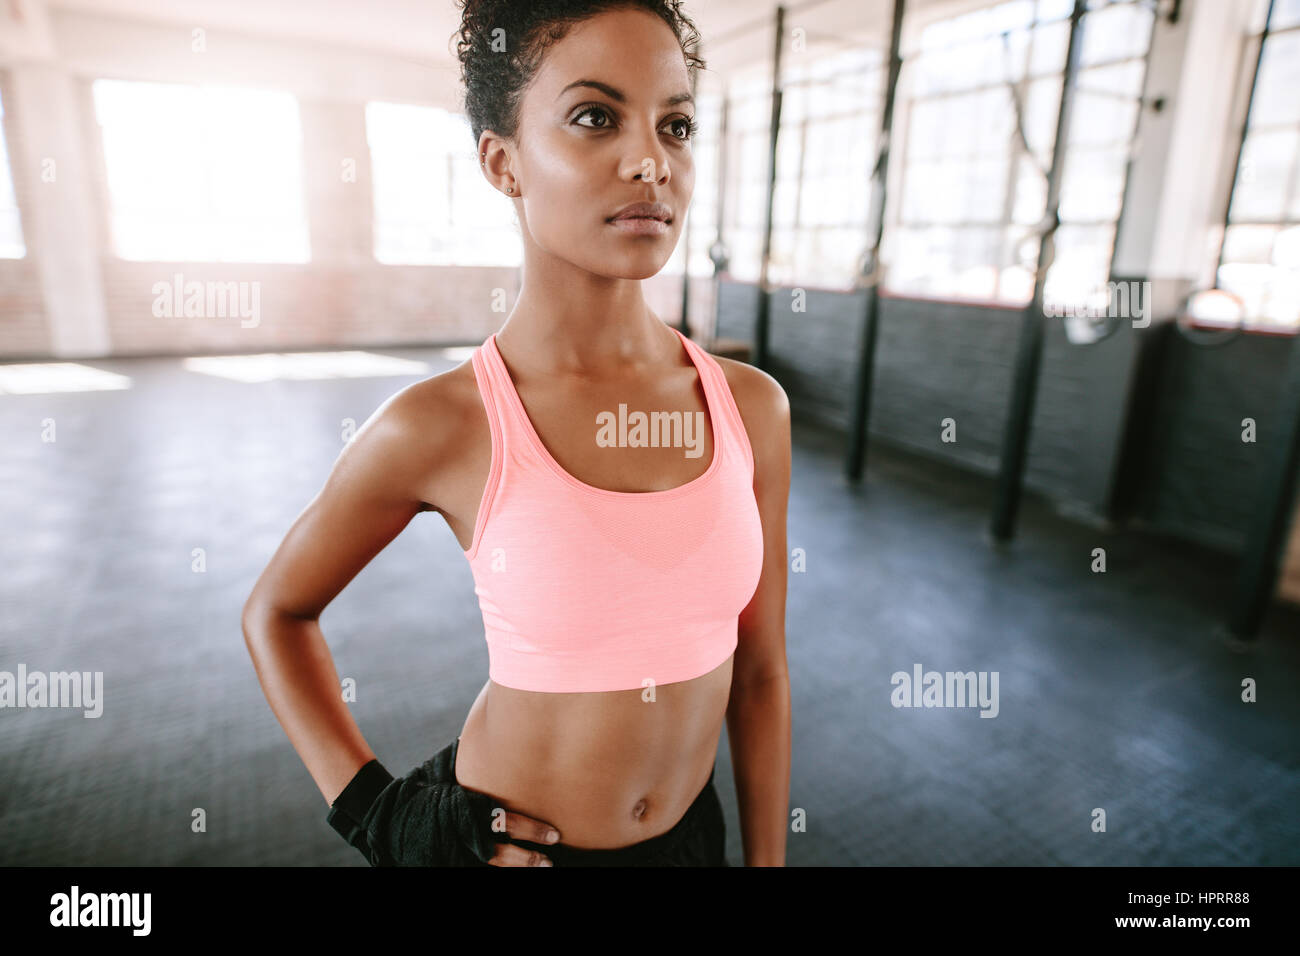 Portrait of healthy young female model standing in gym. Fitness woman in sportswear looking away. Stock Photo